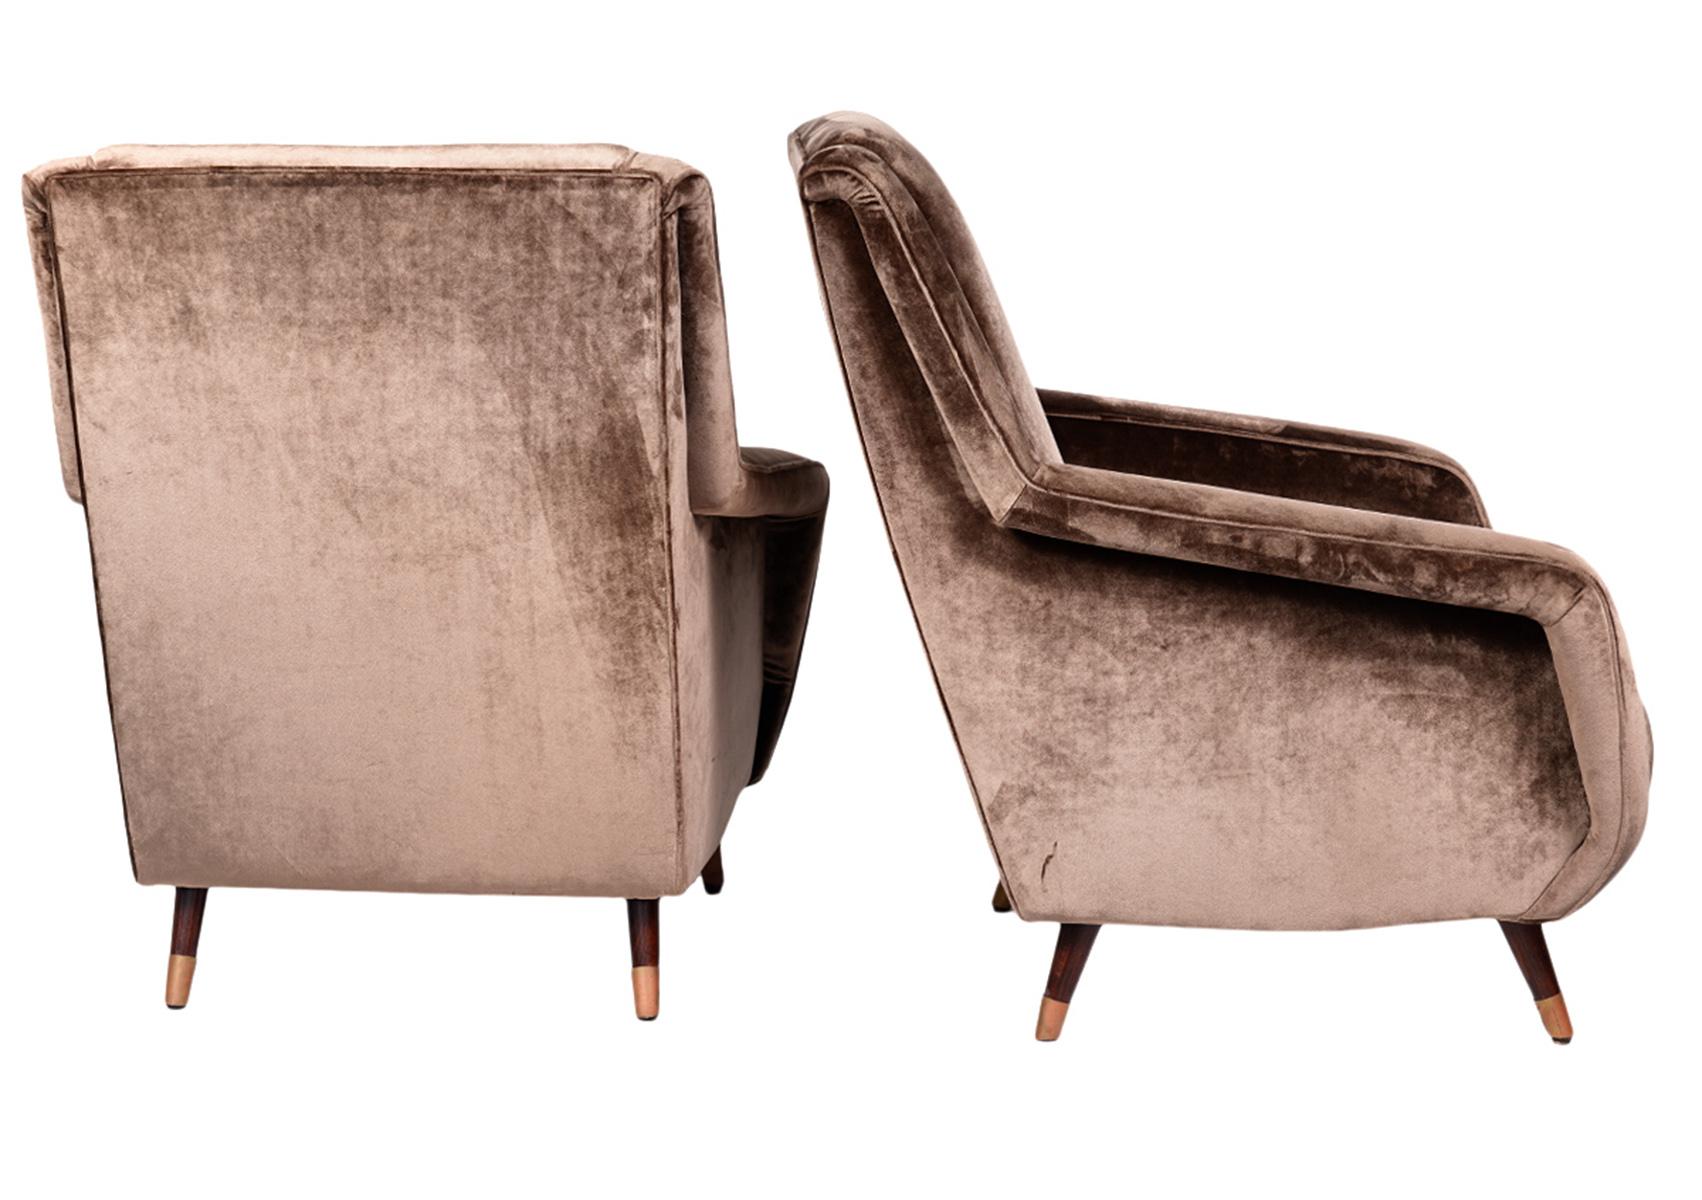 Resting on four round tapering wood legs with copper sleeves these easy chairs or lounge chairs display their sculptural form to the fullest. The slightly downwards slanted armrests is quite a unique design. The velvet cover is full of life changing